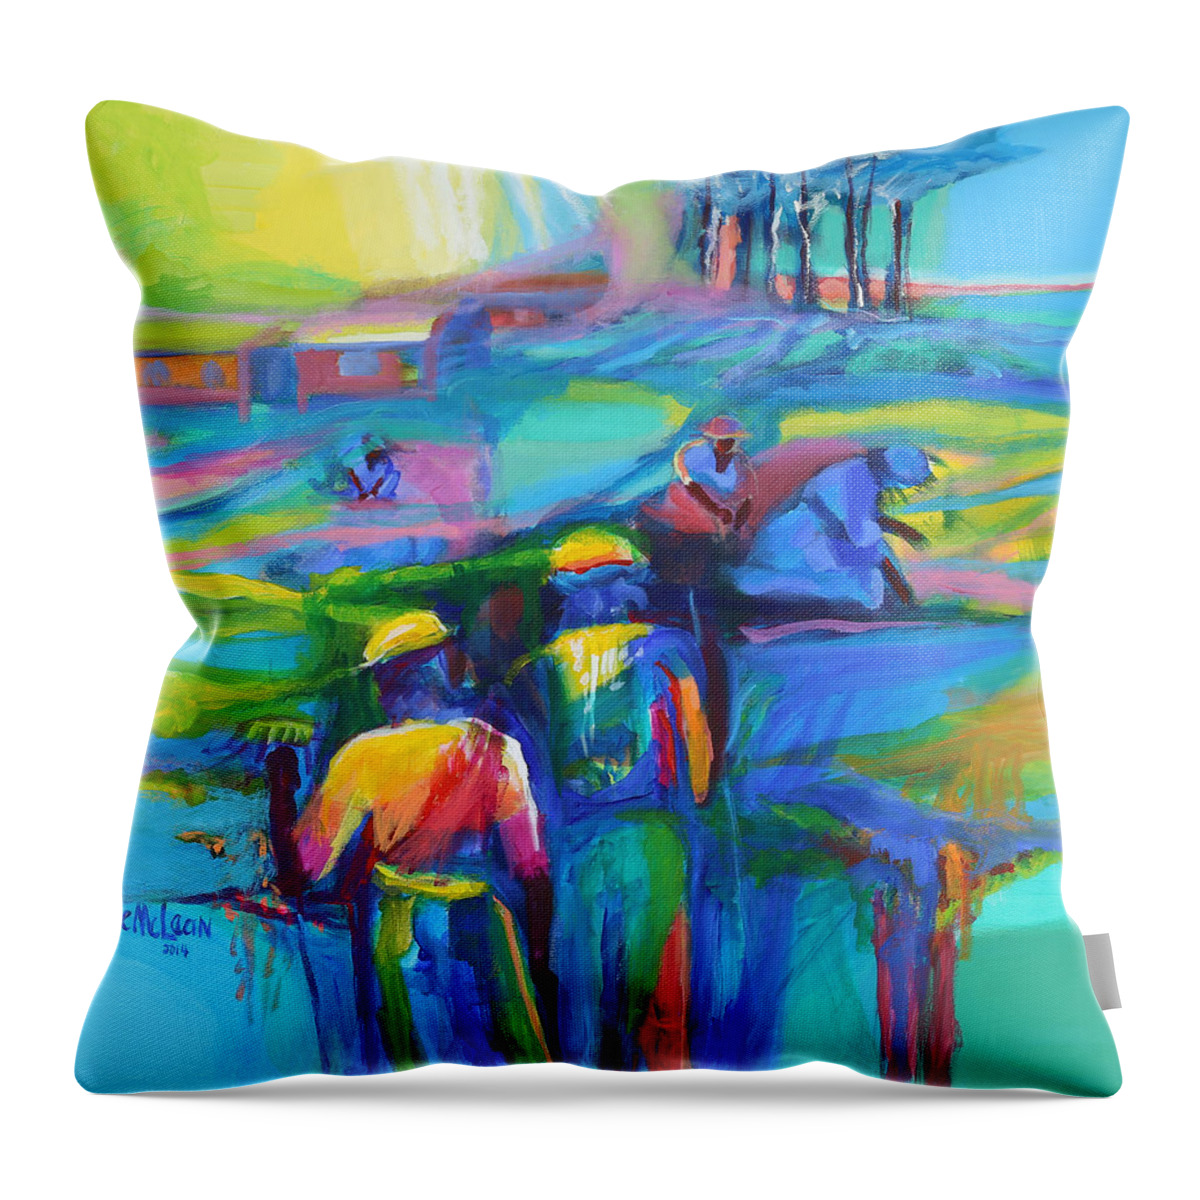 Abstract Throw Pillow featuring the painting Sowing the Seeds by Cynthia McLean